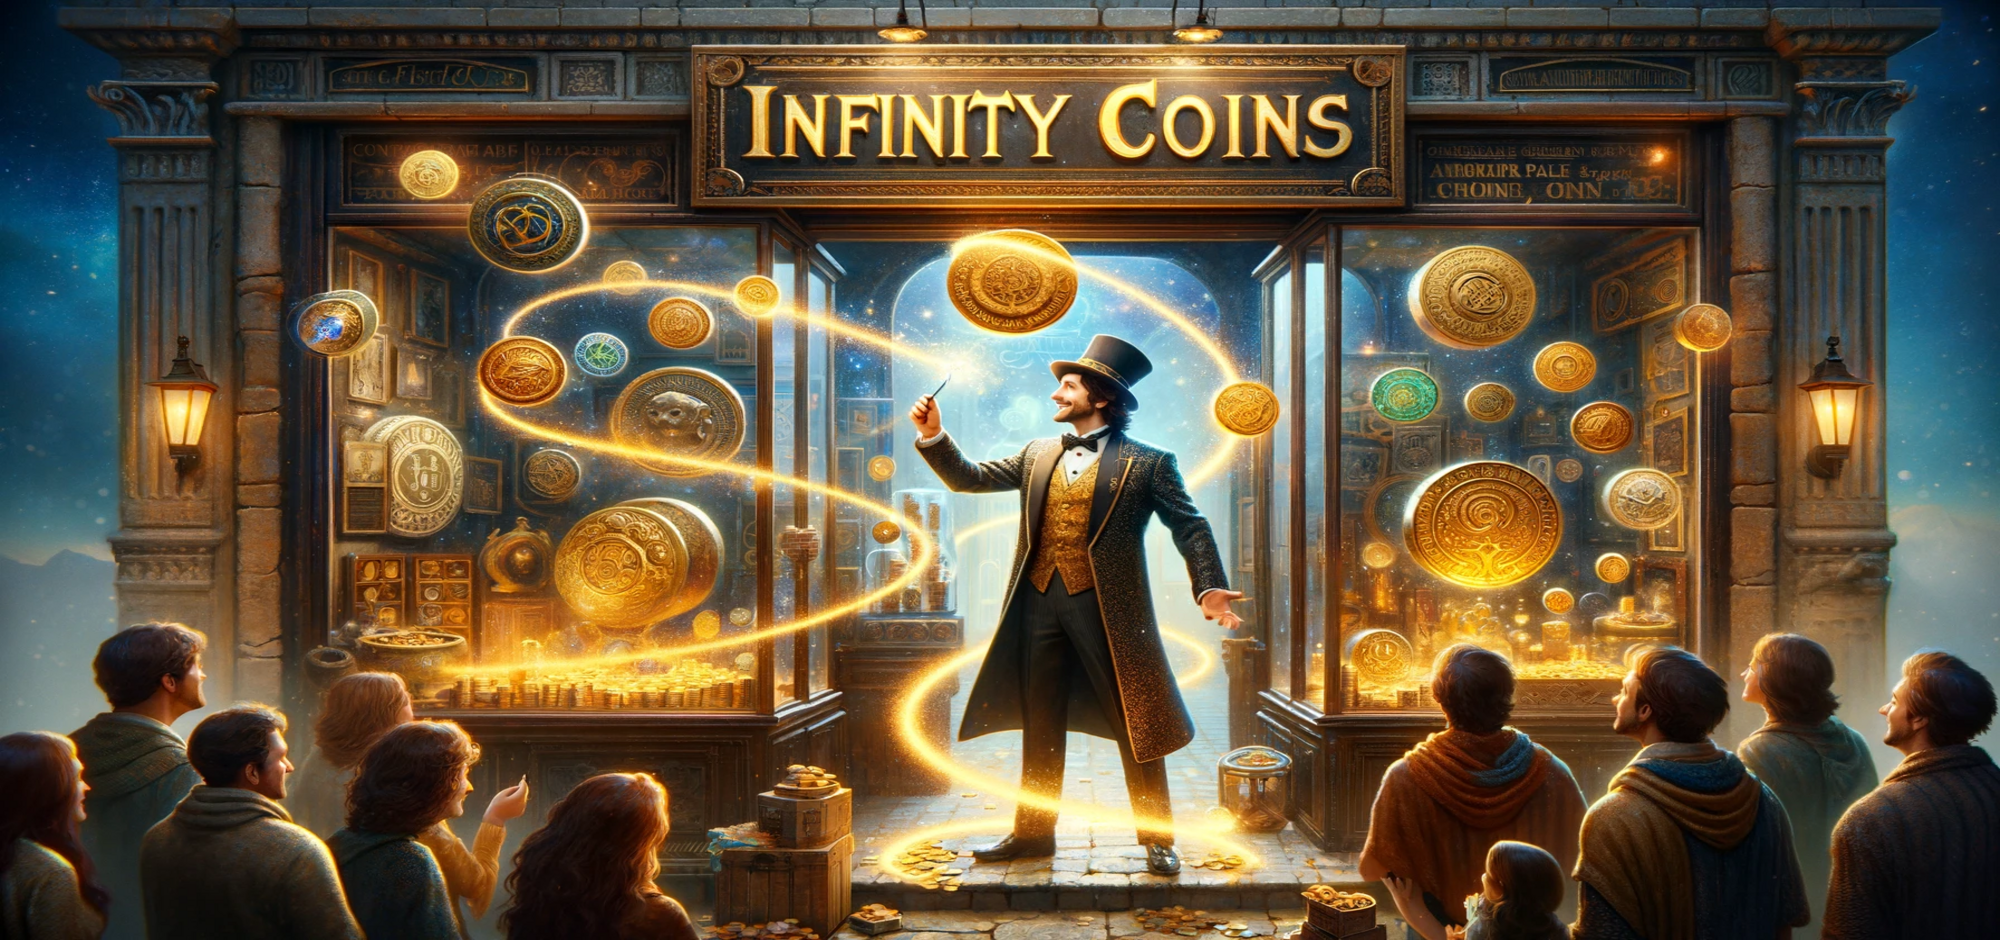 A mystical coin shop scene with a magician-like shopkeeper levitating rare coins amidst the awe of o